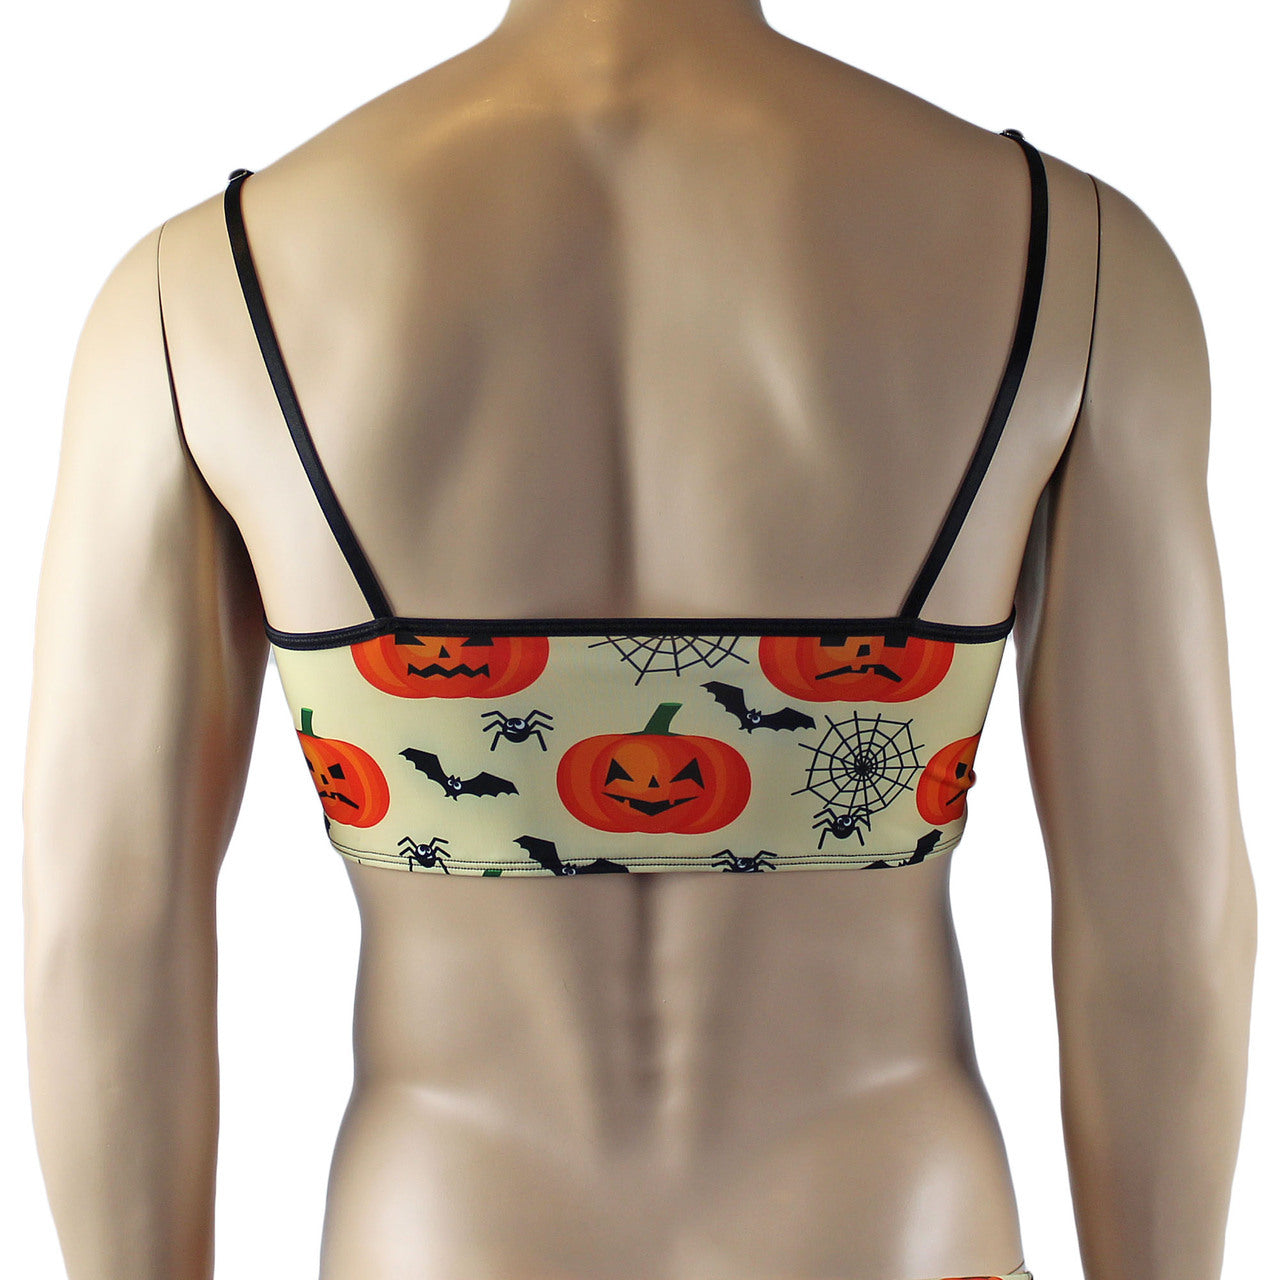 Mens Halloween Pumpkin Faces, Spiders and Bats Camisole Top